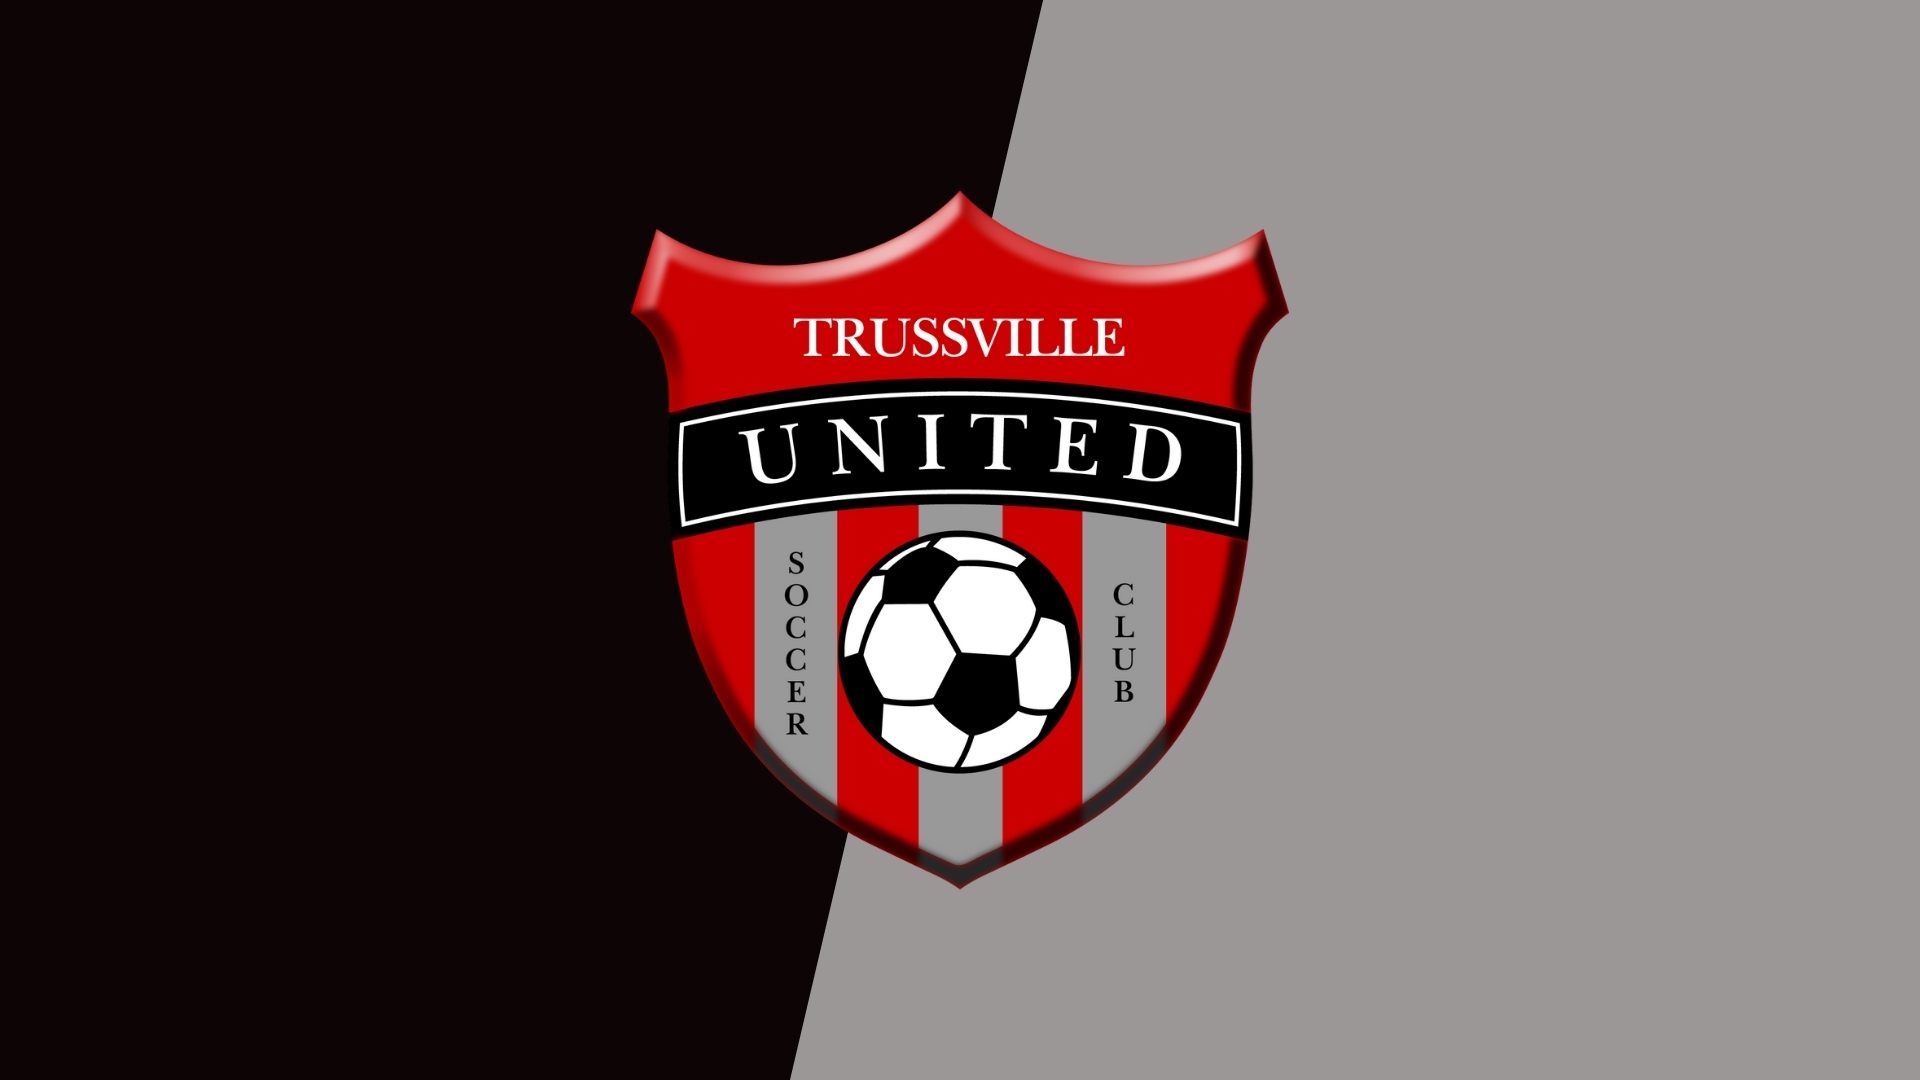 Trussville United Soccer Partners with Vestavia Hills Soccer Club –  Trussville United Soccer